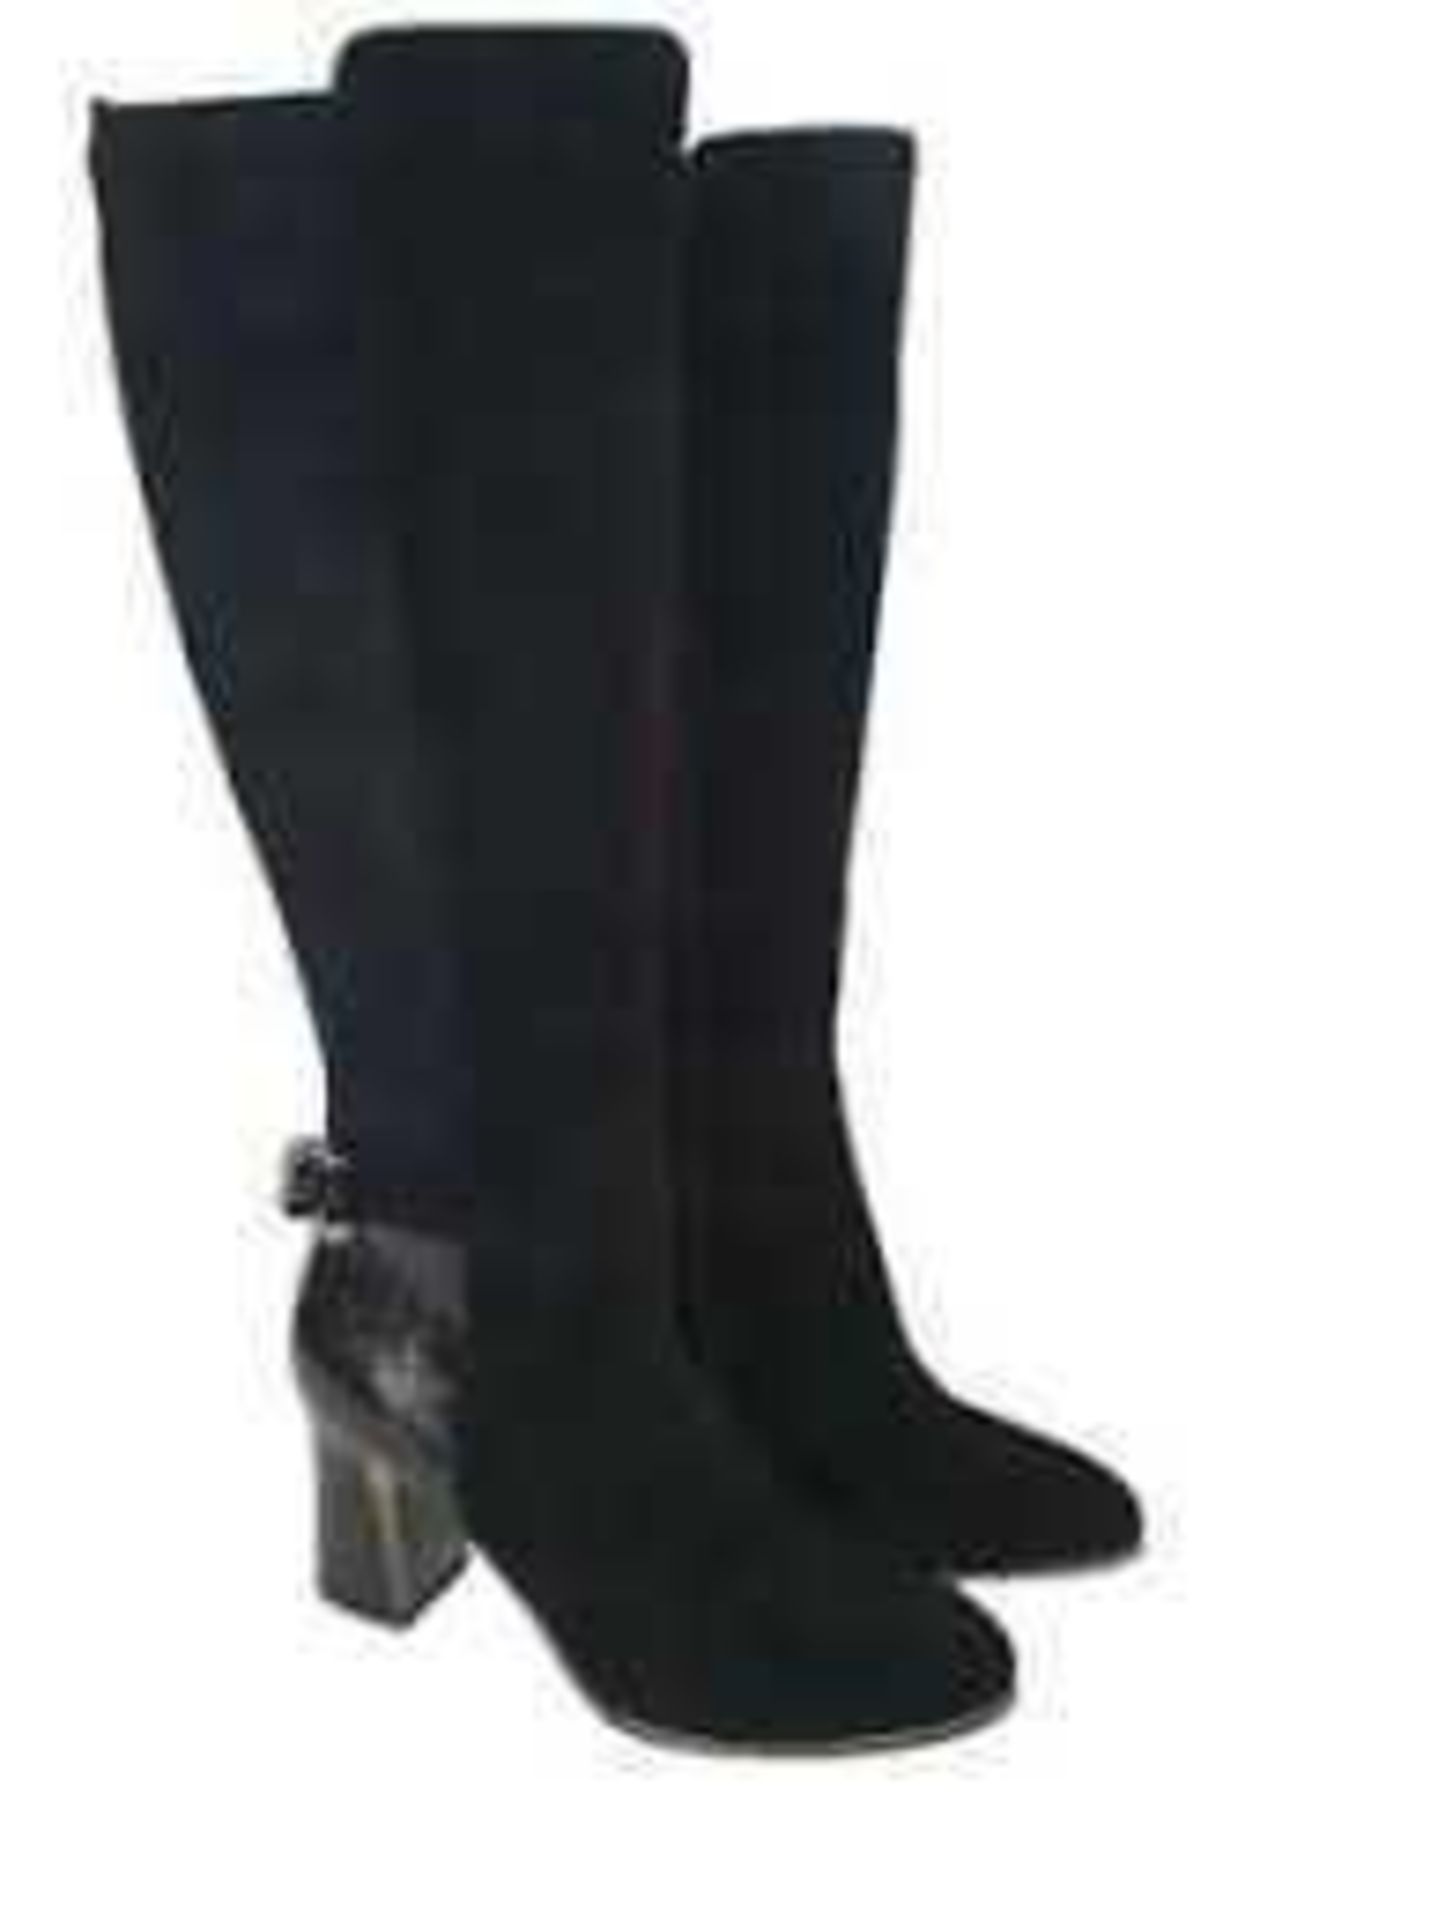 RRP £150 Boxed Moda In Pelle Tanci Knee High Boot, Navy Blue, Size Eur 40 - Image 3 of 3